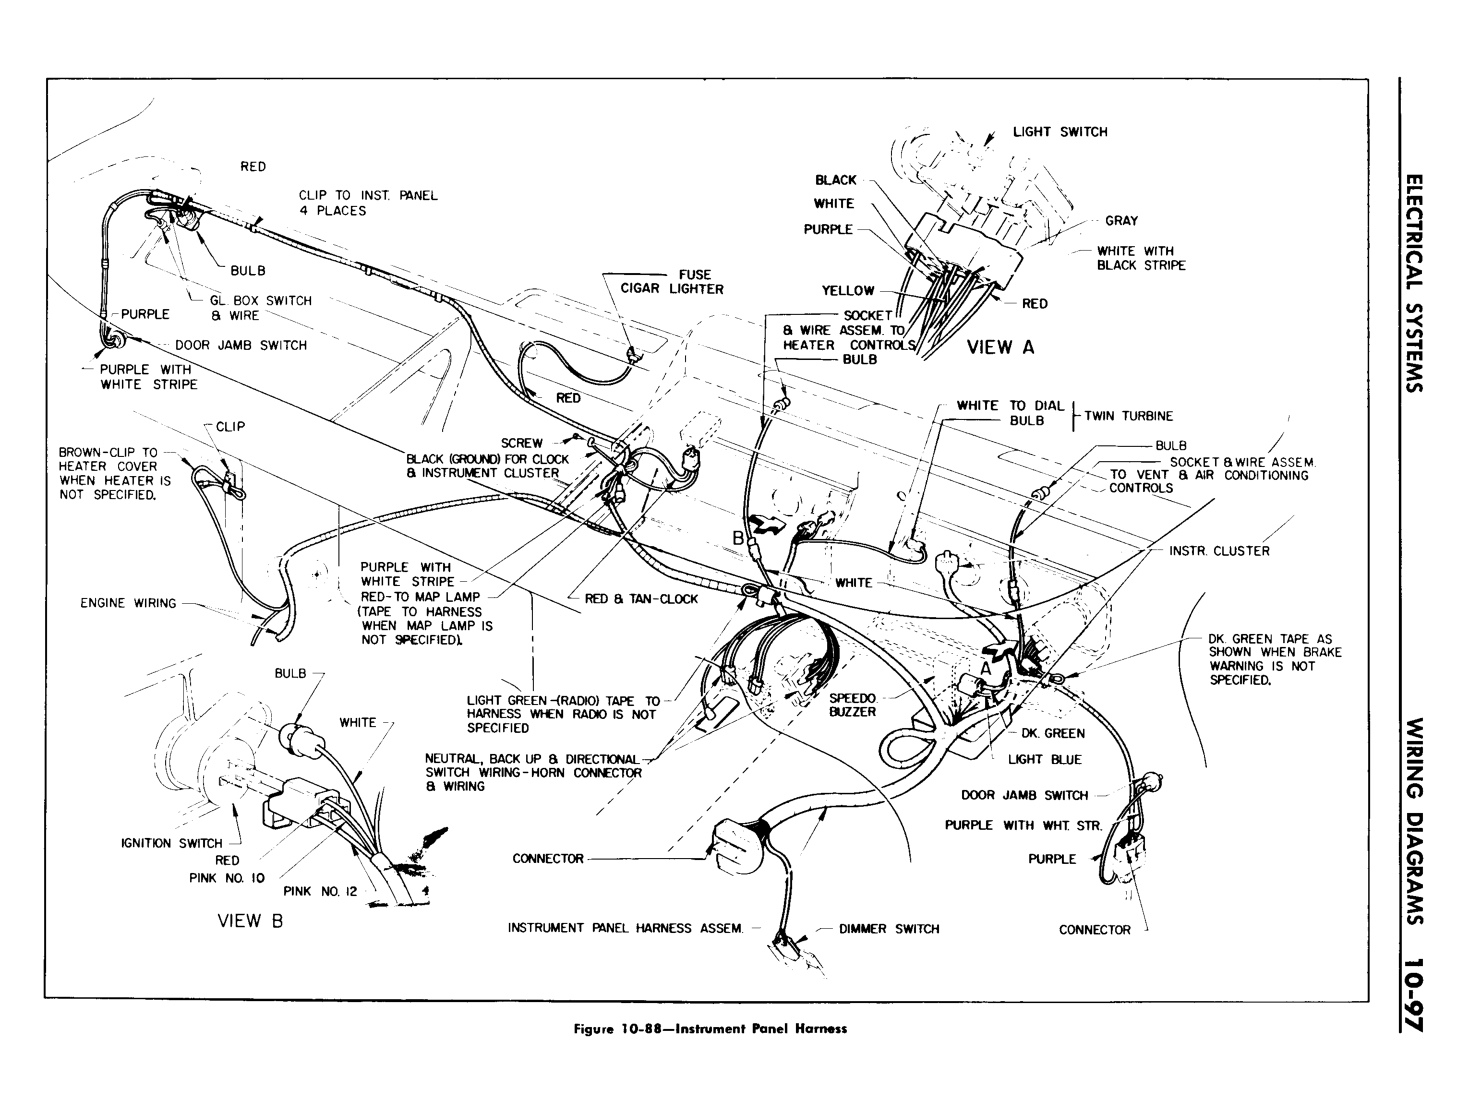 n_11 1960 Buick Shop Manual - Electrical Systems-097-097.jpg